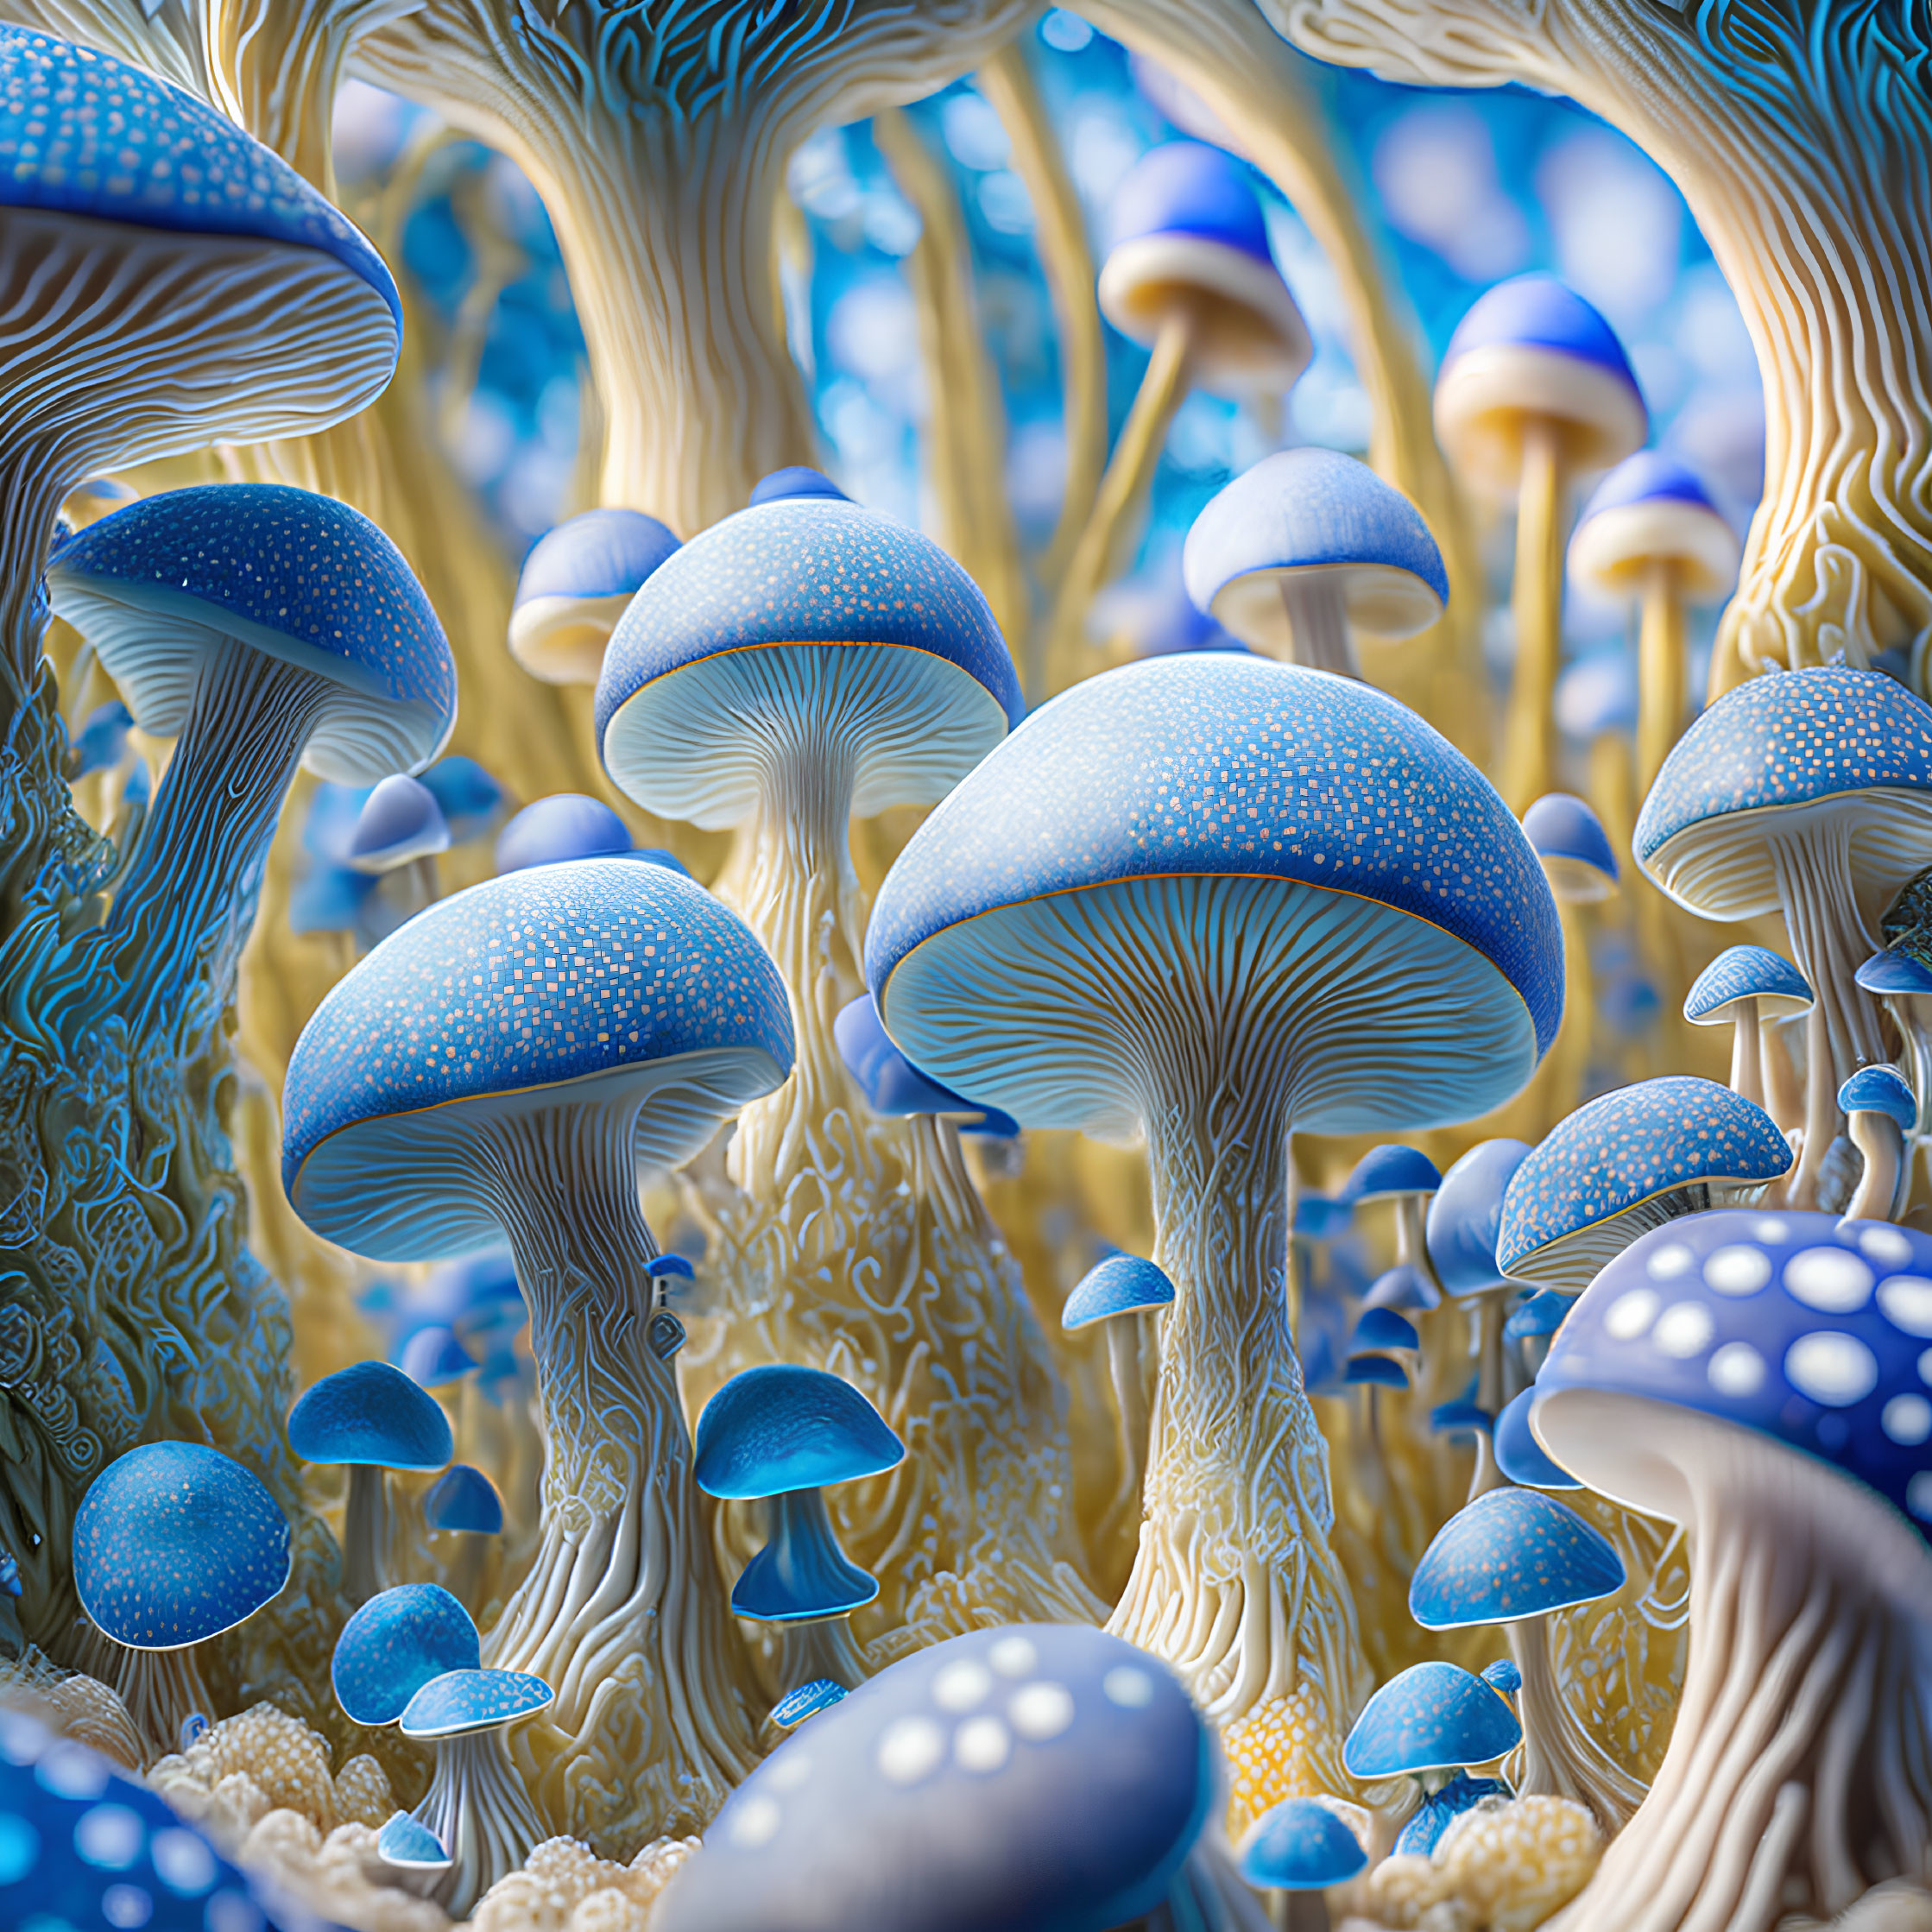 Fantastical forest of blue and white mushrooms in digital art